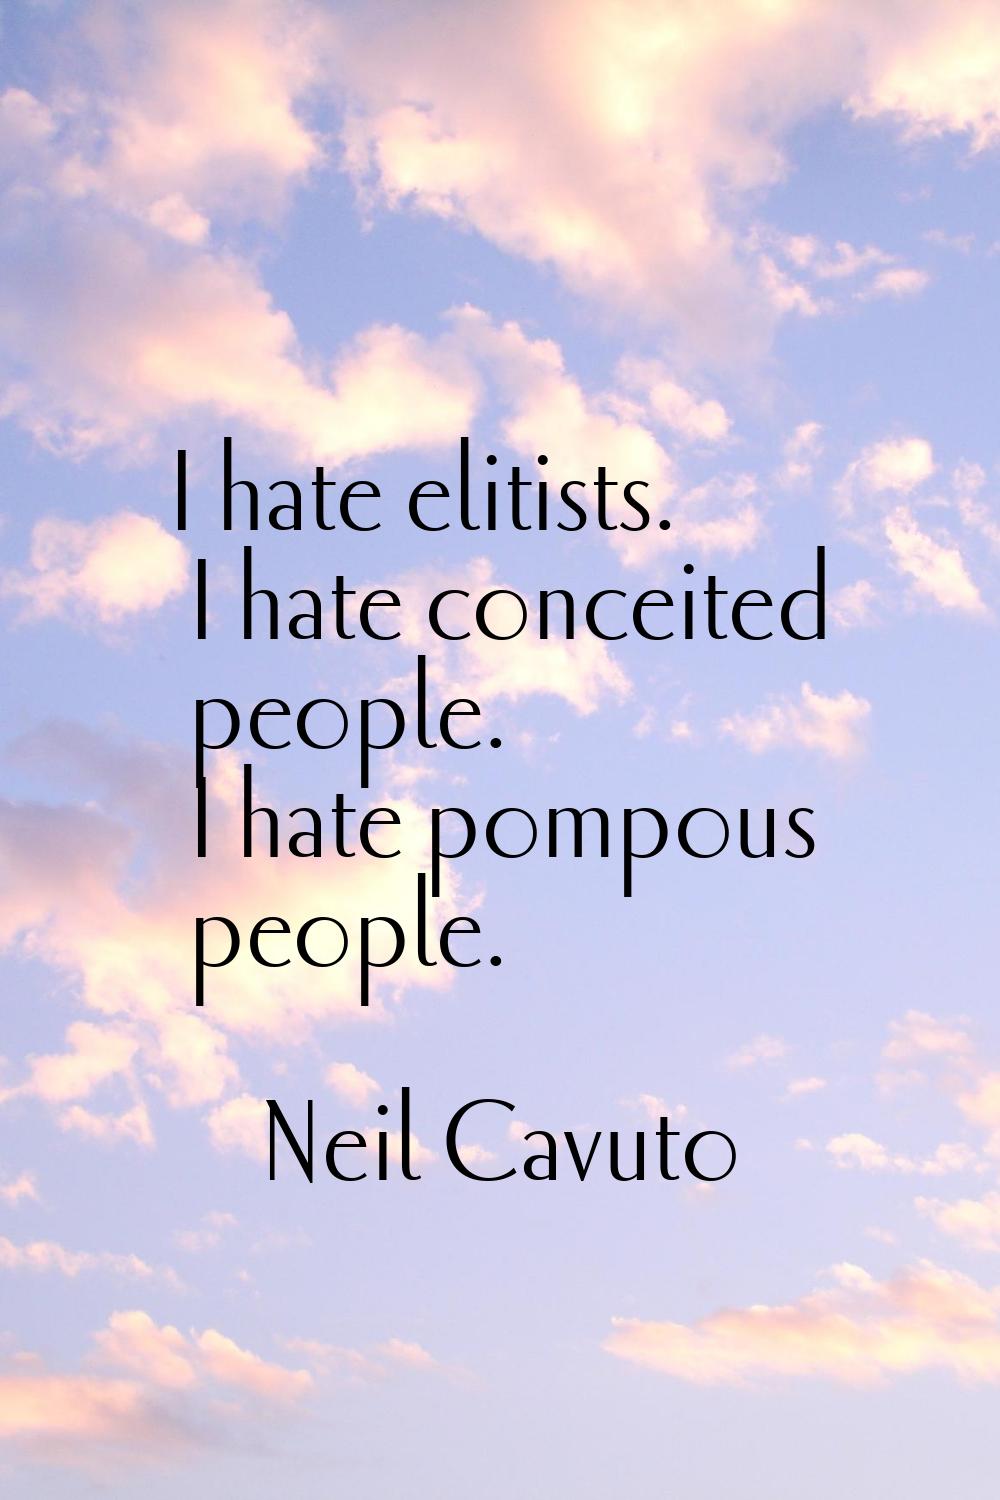 I hate elitists. I hate conceited people. I hate pompous people.